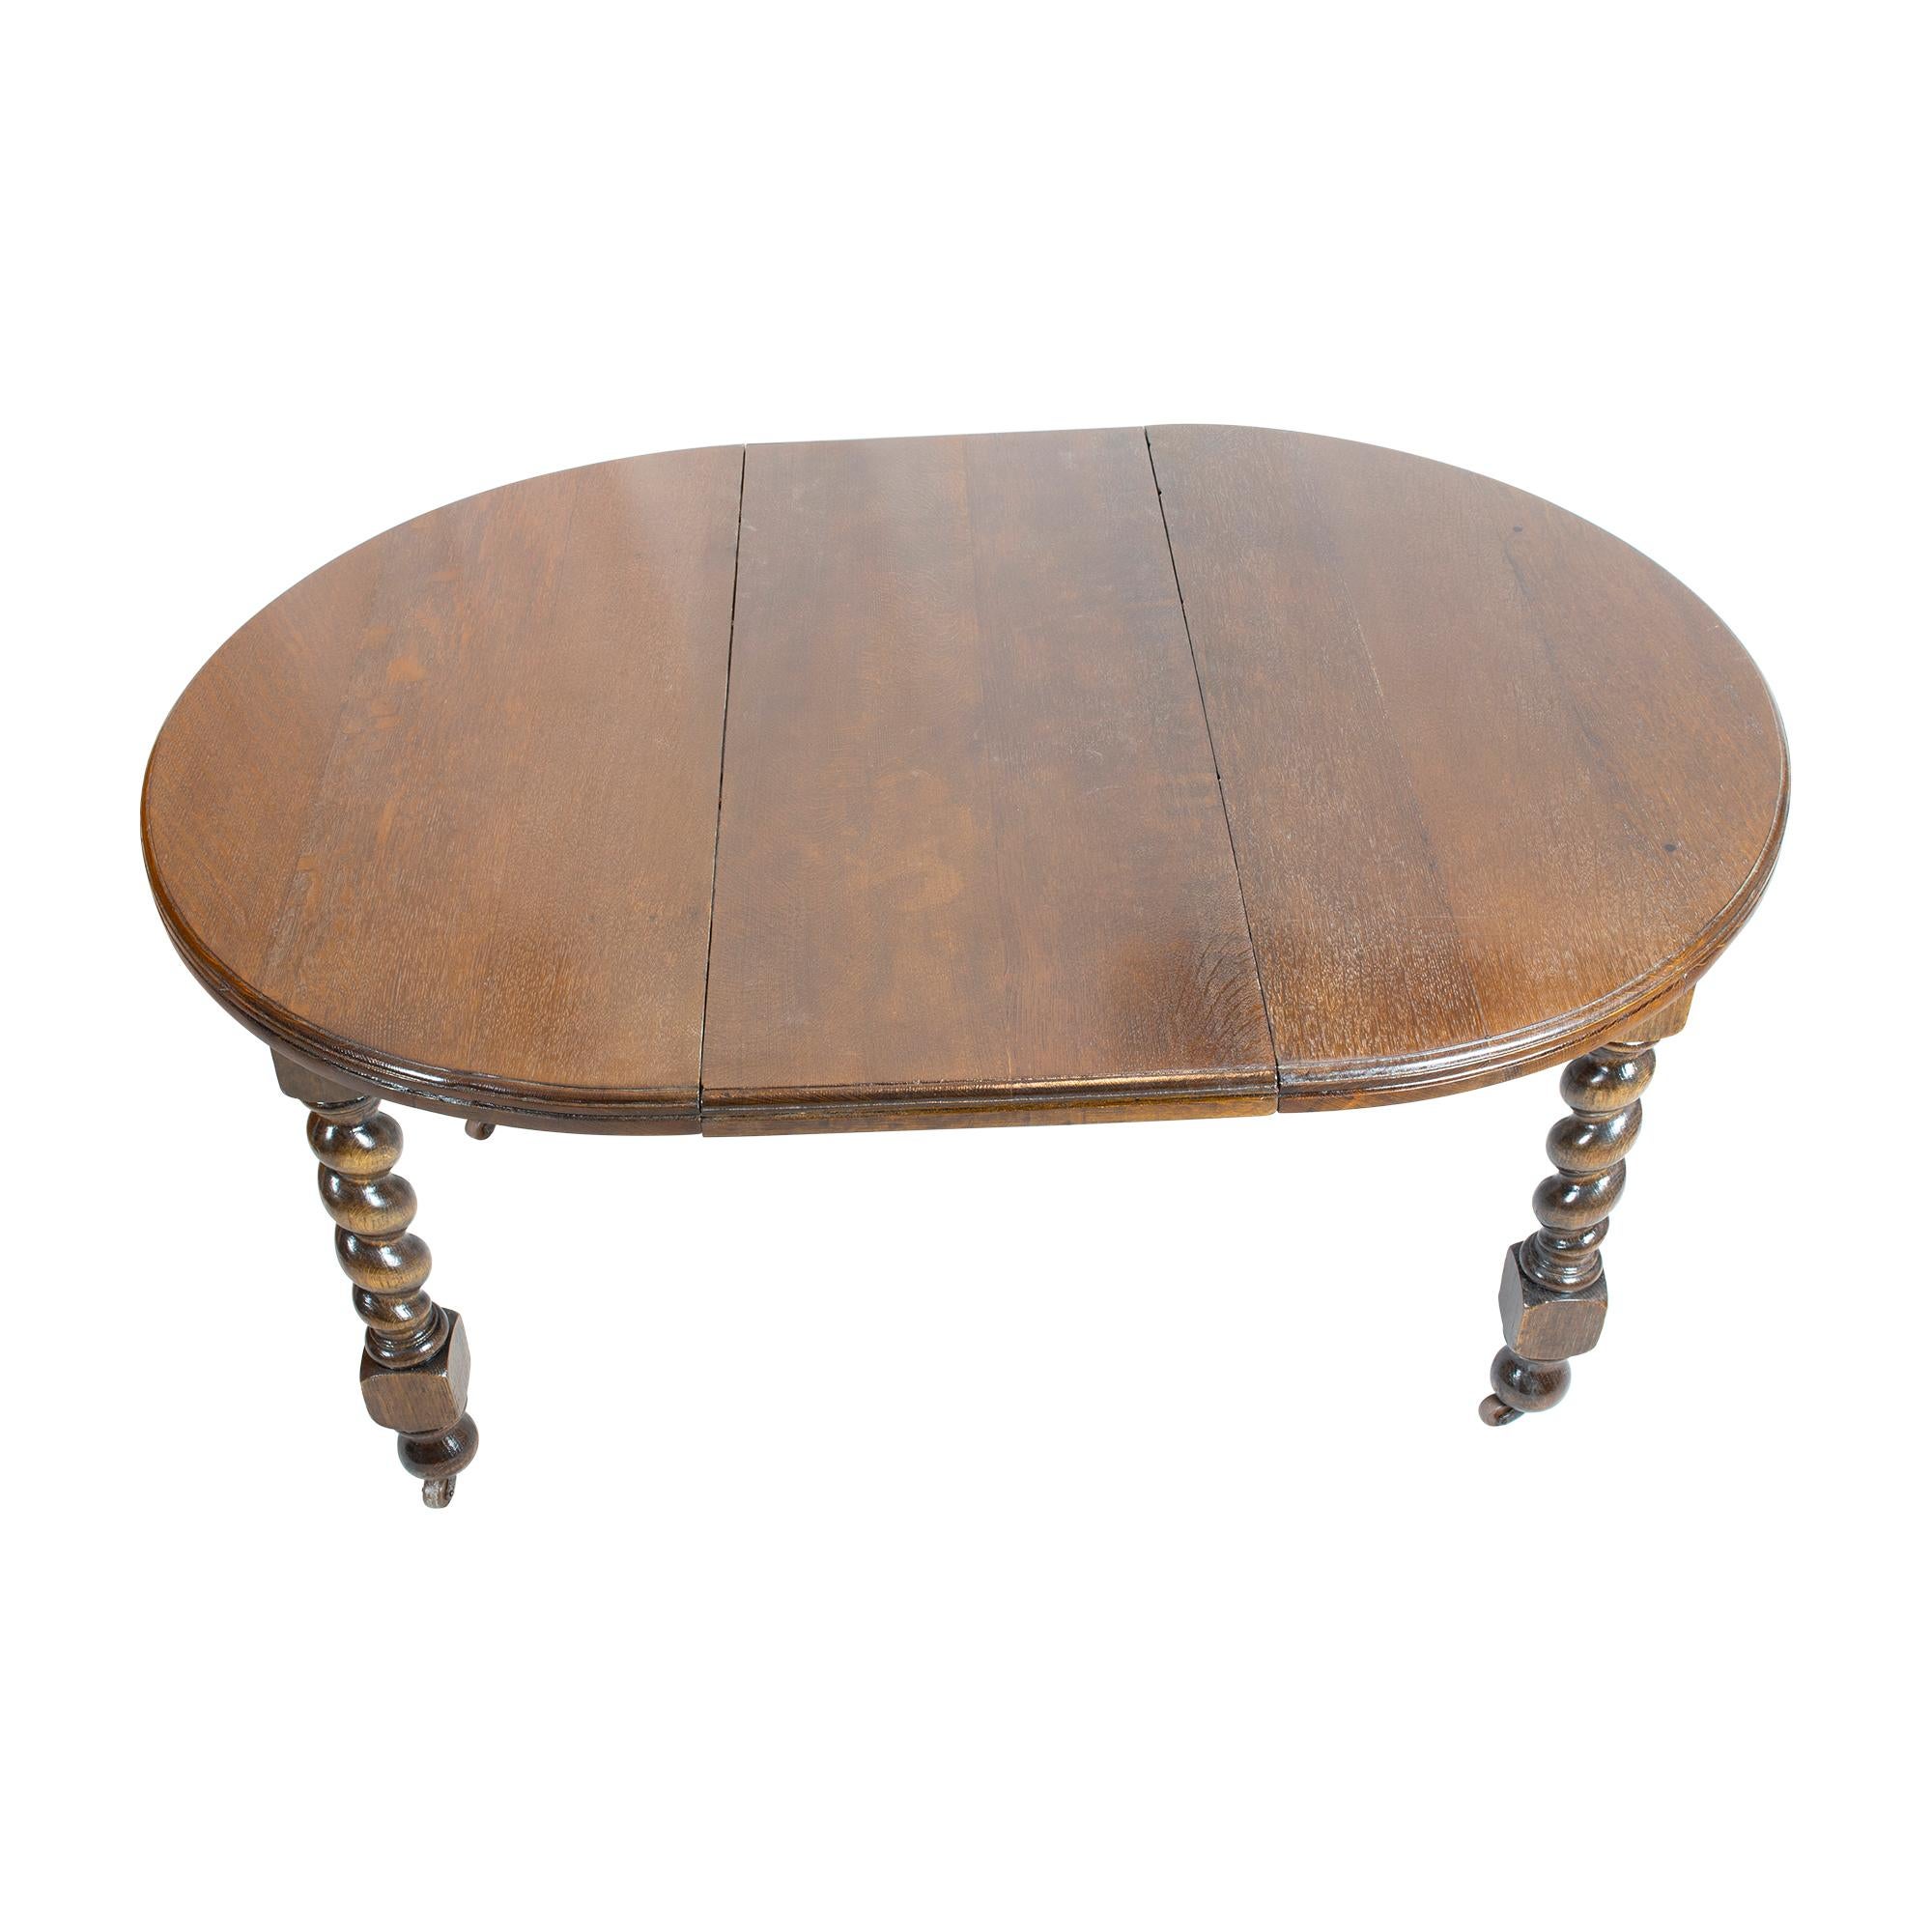 Polished Round Oak Table Extendable from England Around 1880 For Sale